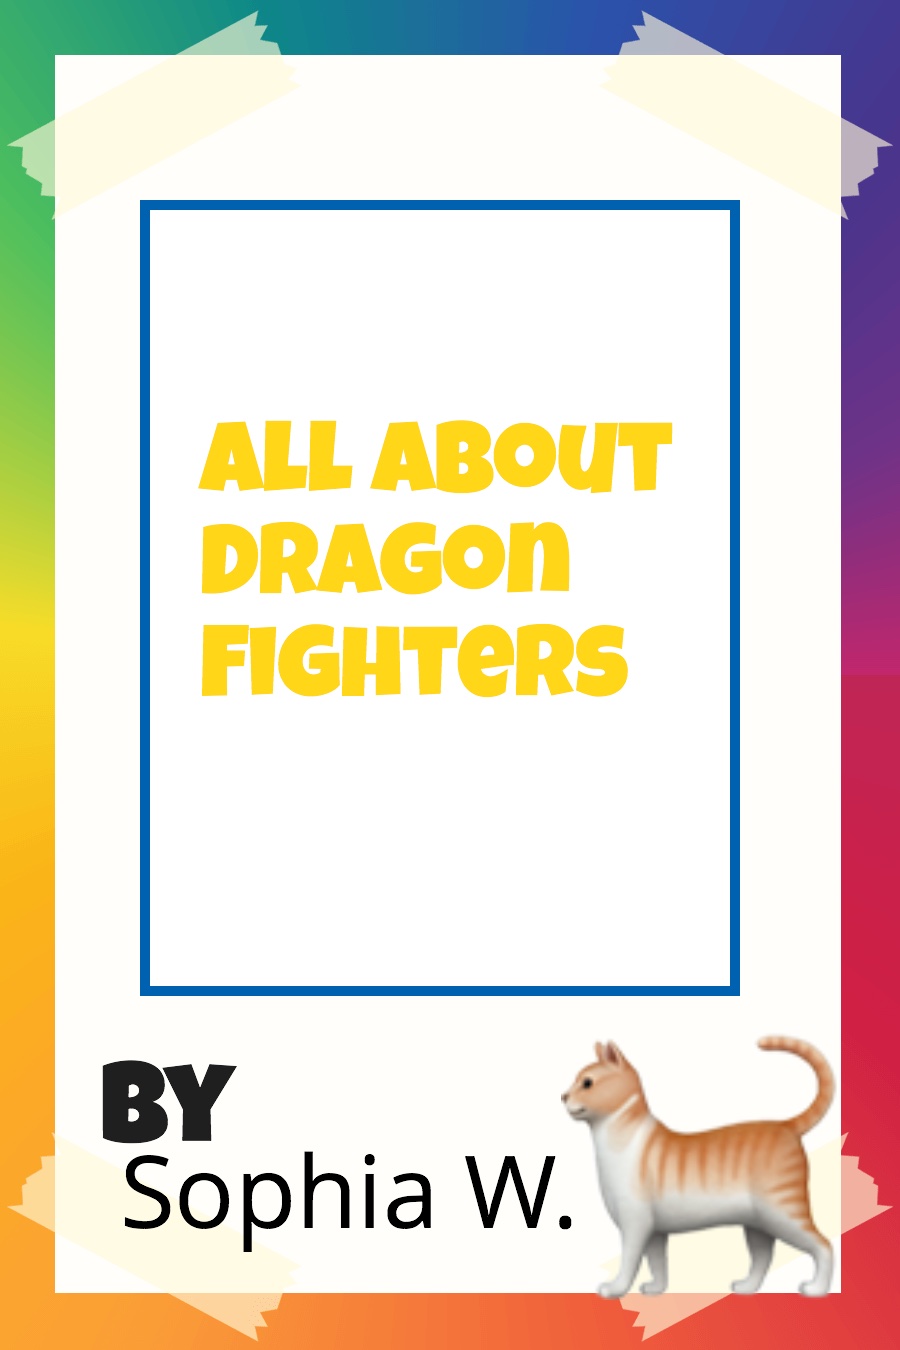 All About Dragon Fighters by Sophia W